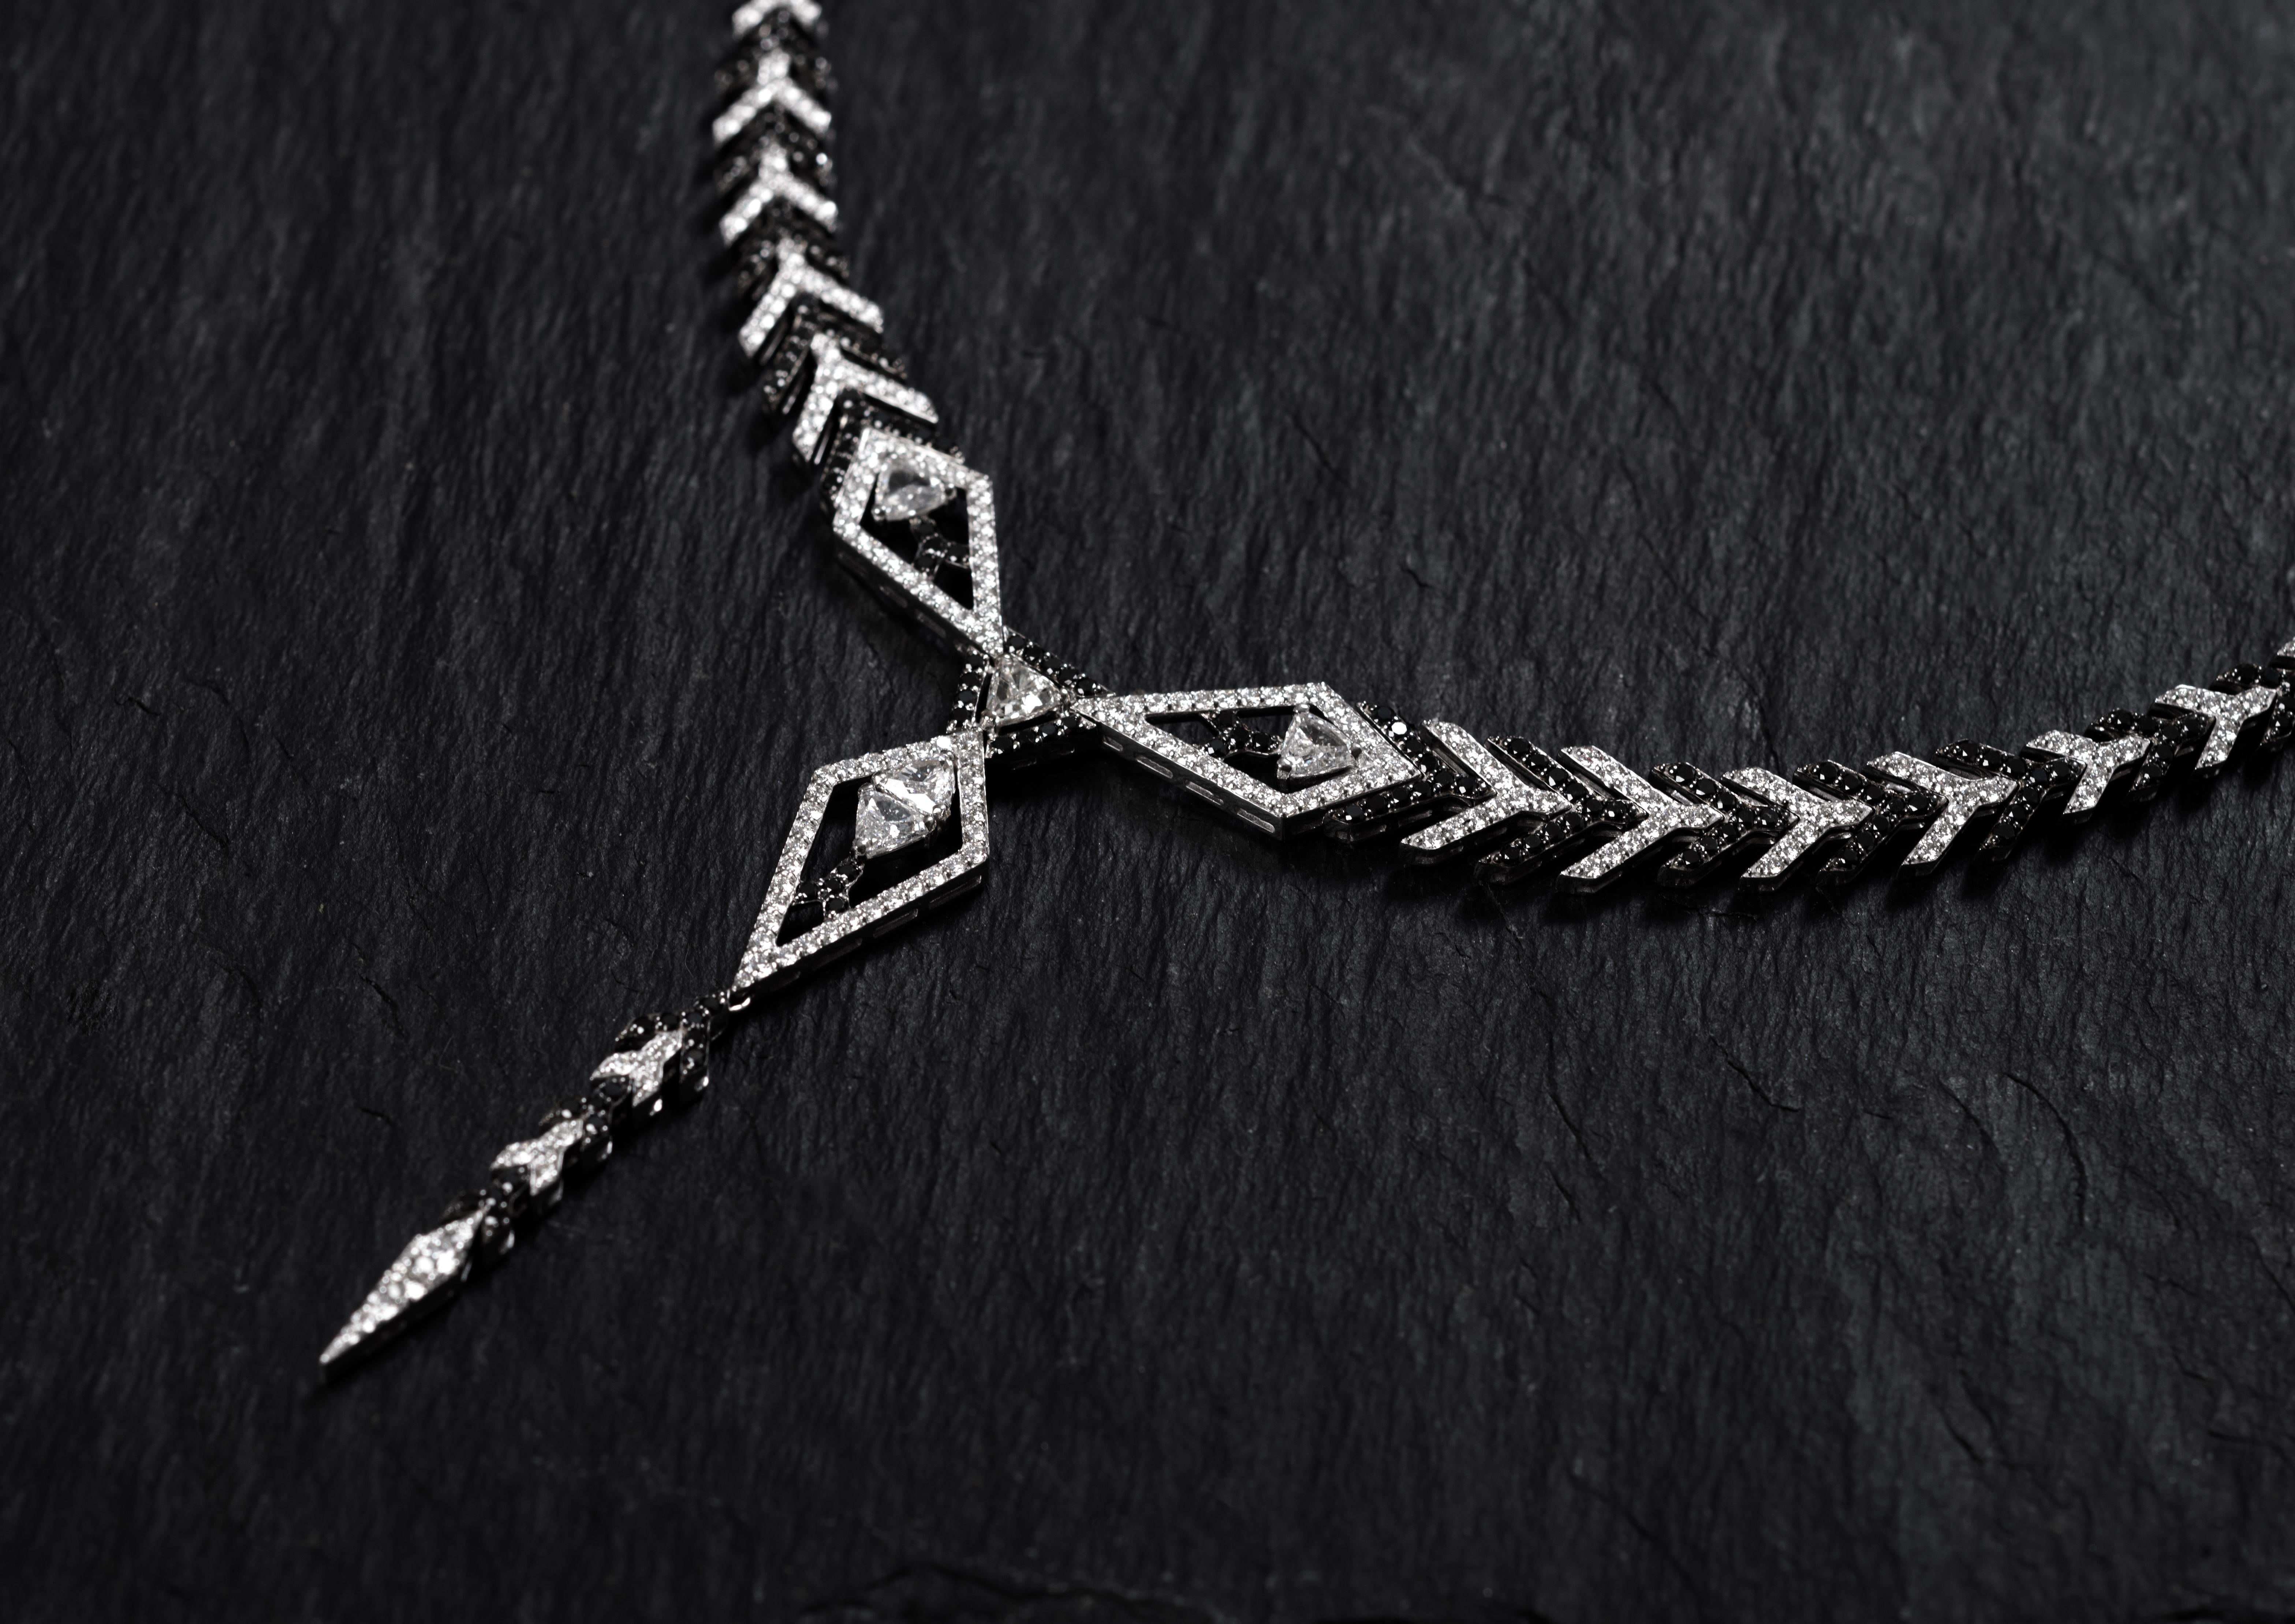 Embrace the show-stopping glamour with our extraordinary 18k white gold statement necklace. The piece is one of the highlights of the Amara collection, sparkling in a sophisticated colour pallet of black and white diamonds. The design presents arrow